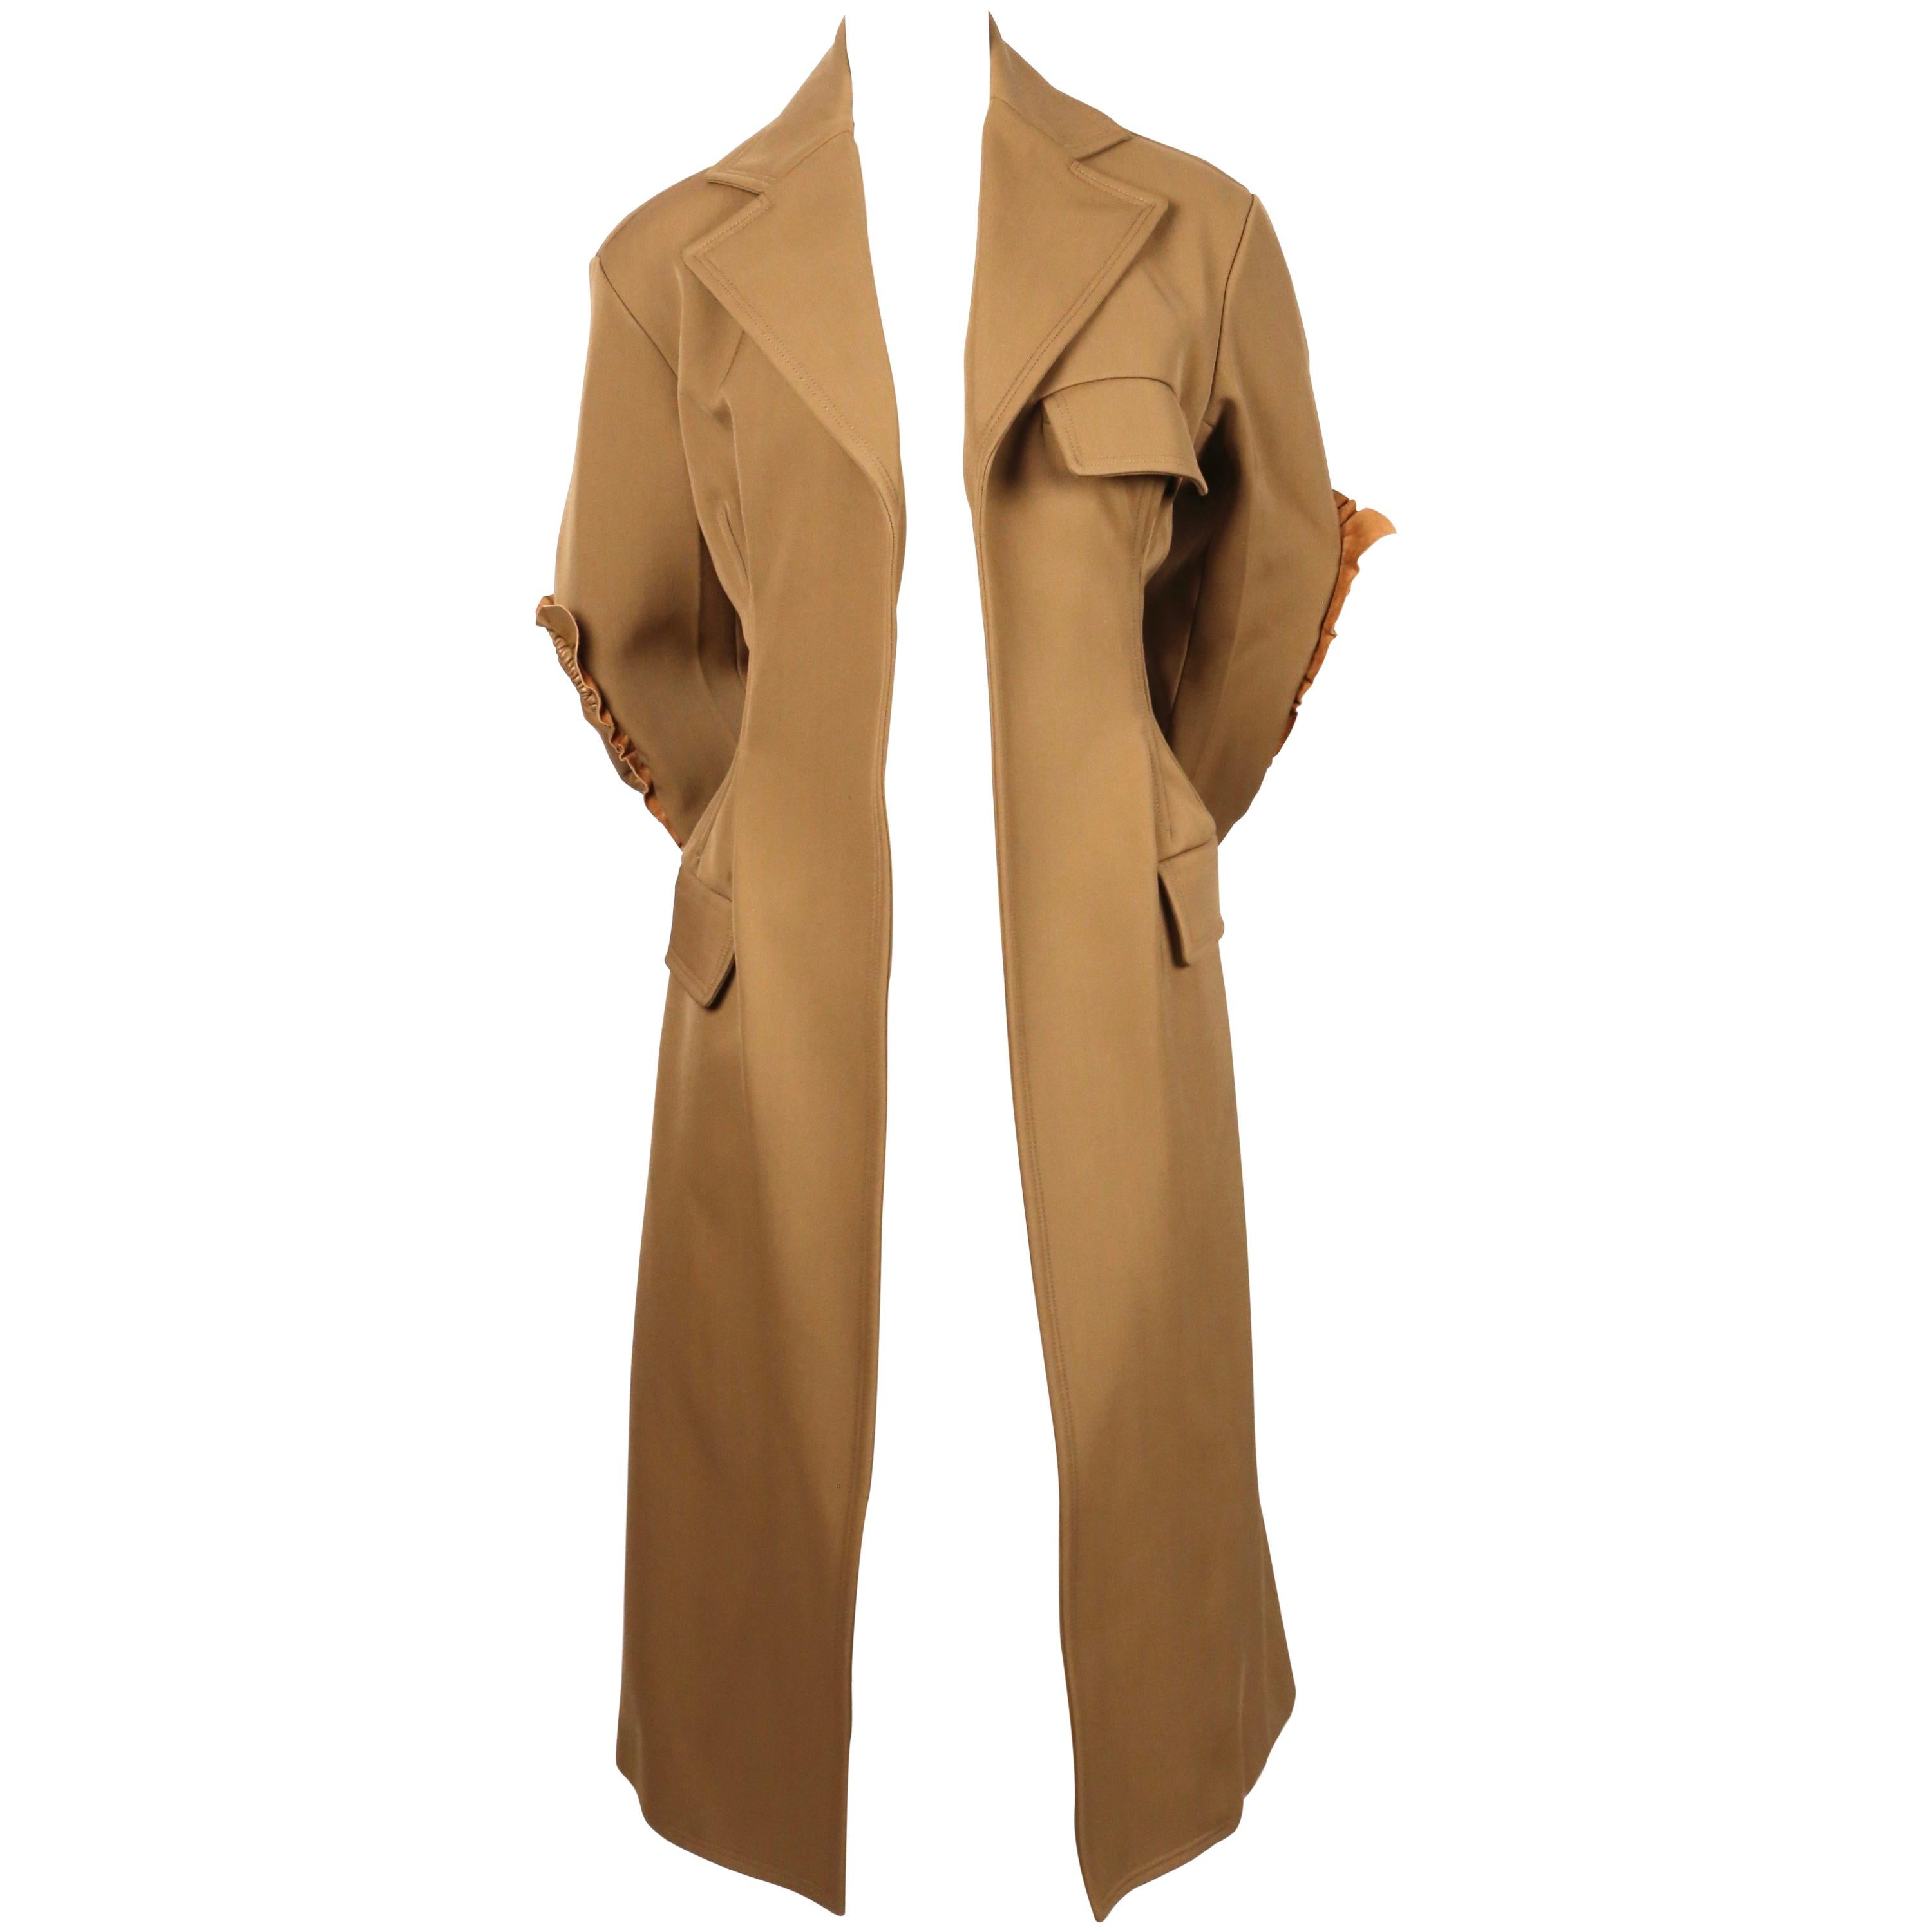 CELINE by PHOEBE PHILO tan runway coat with leather patches & half belt - NEW